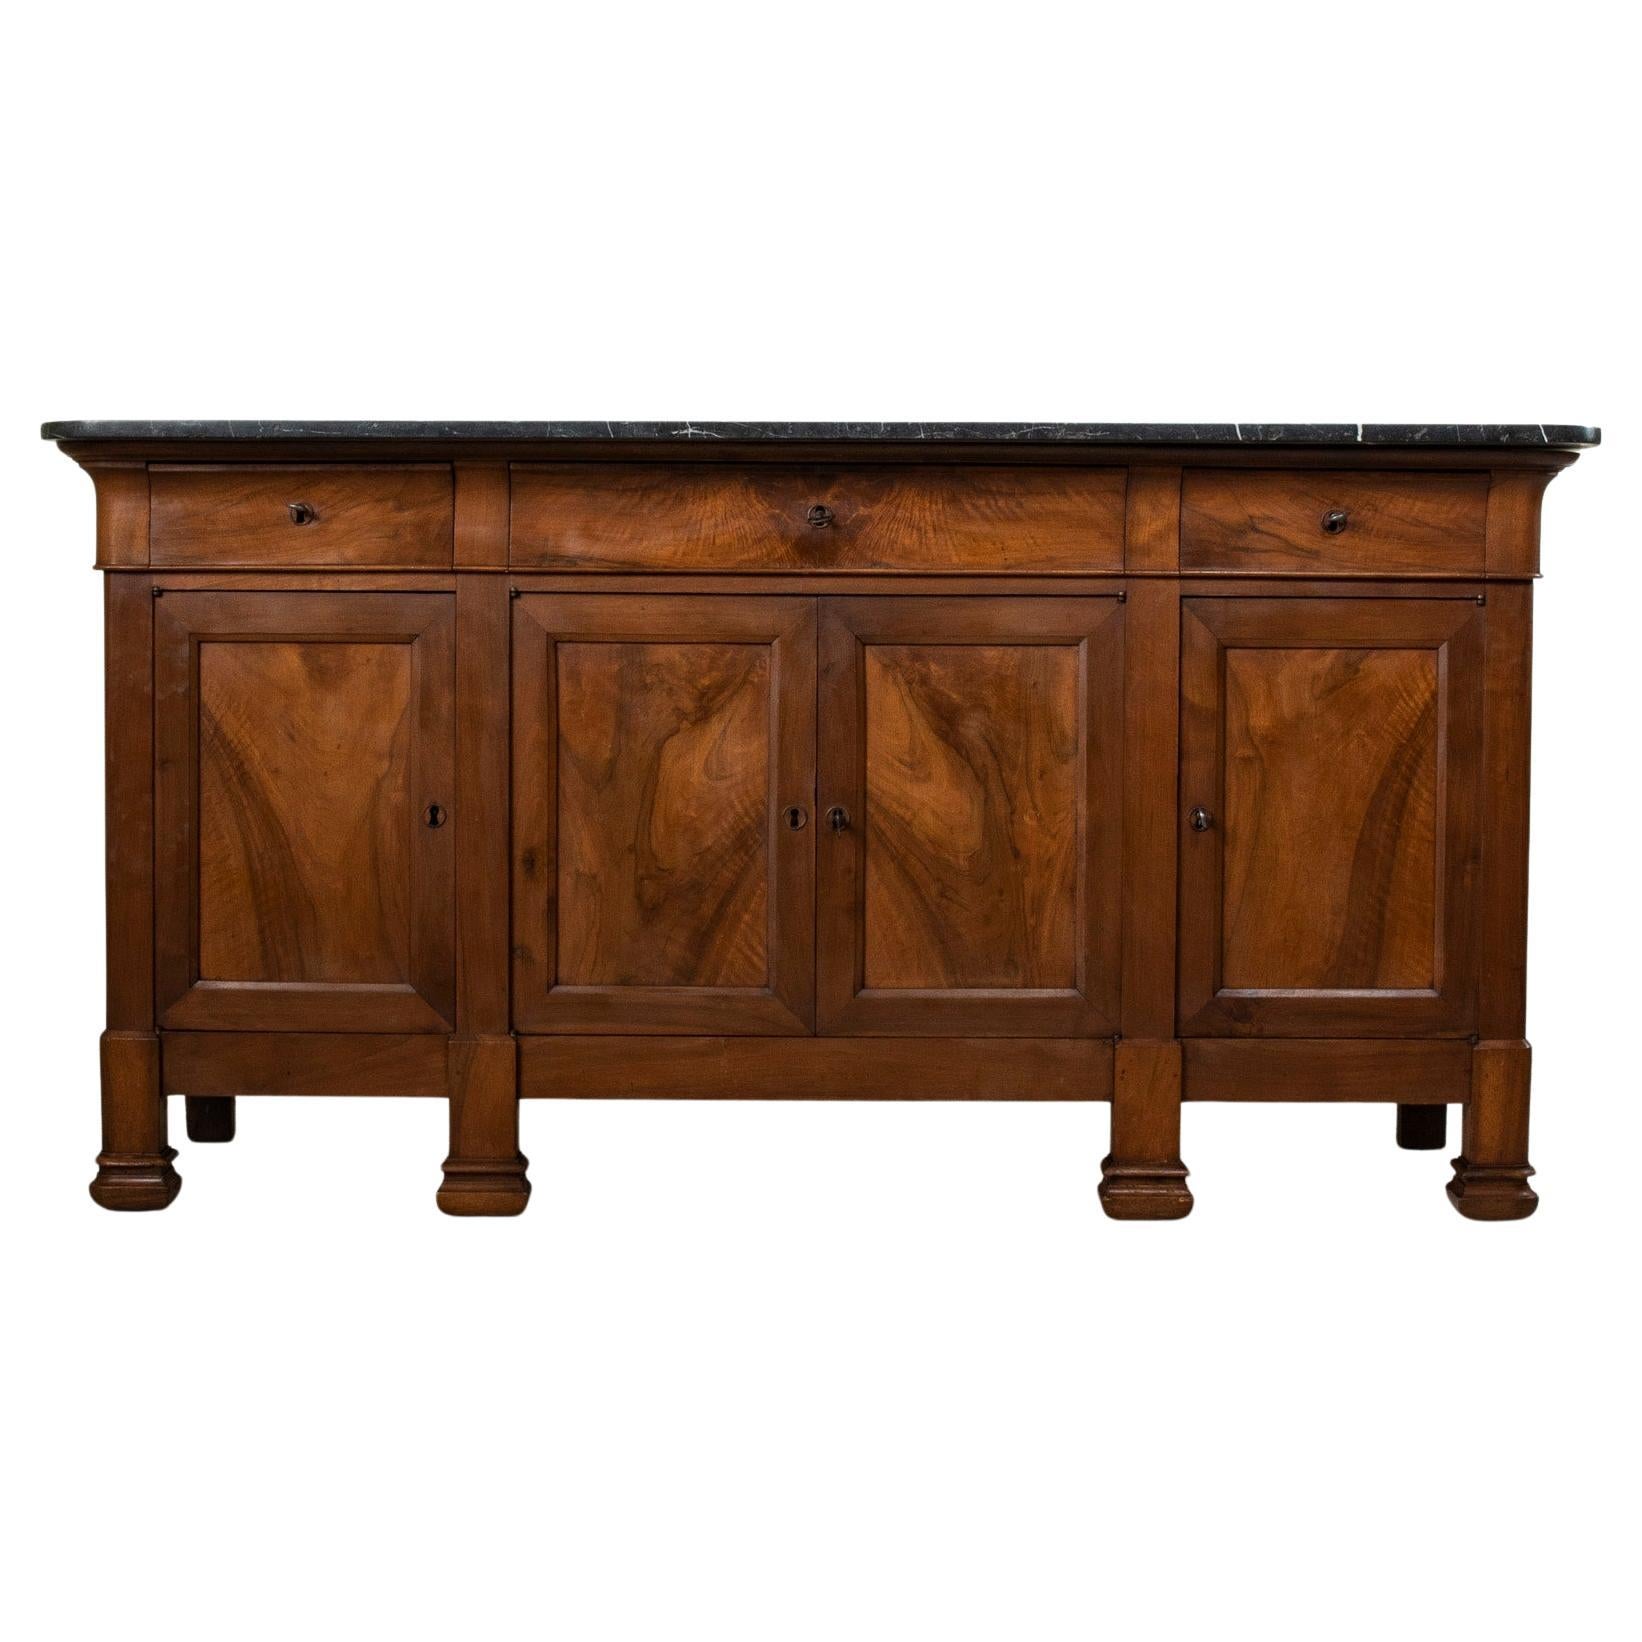 Early 19th Century French Restauration Period Walnut Enfilade Sideboard, Marble